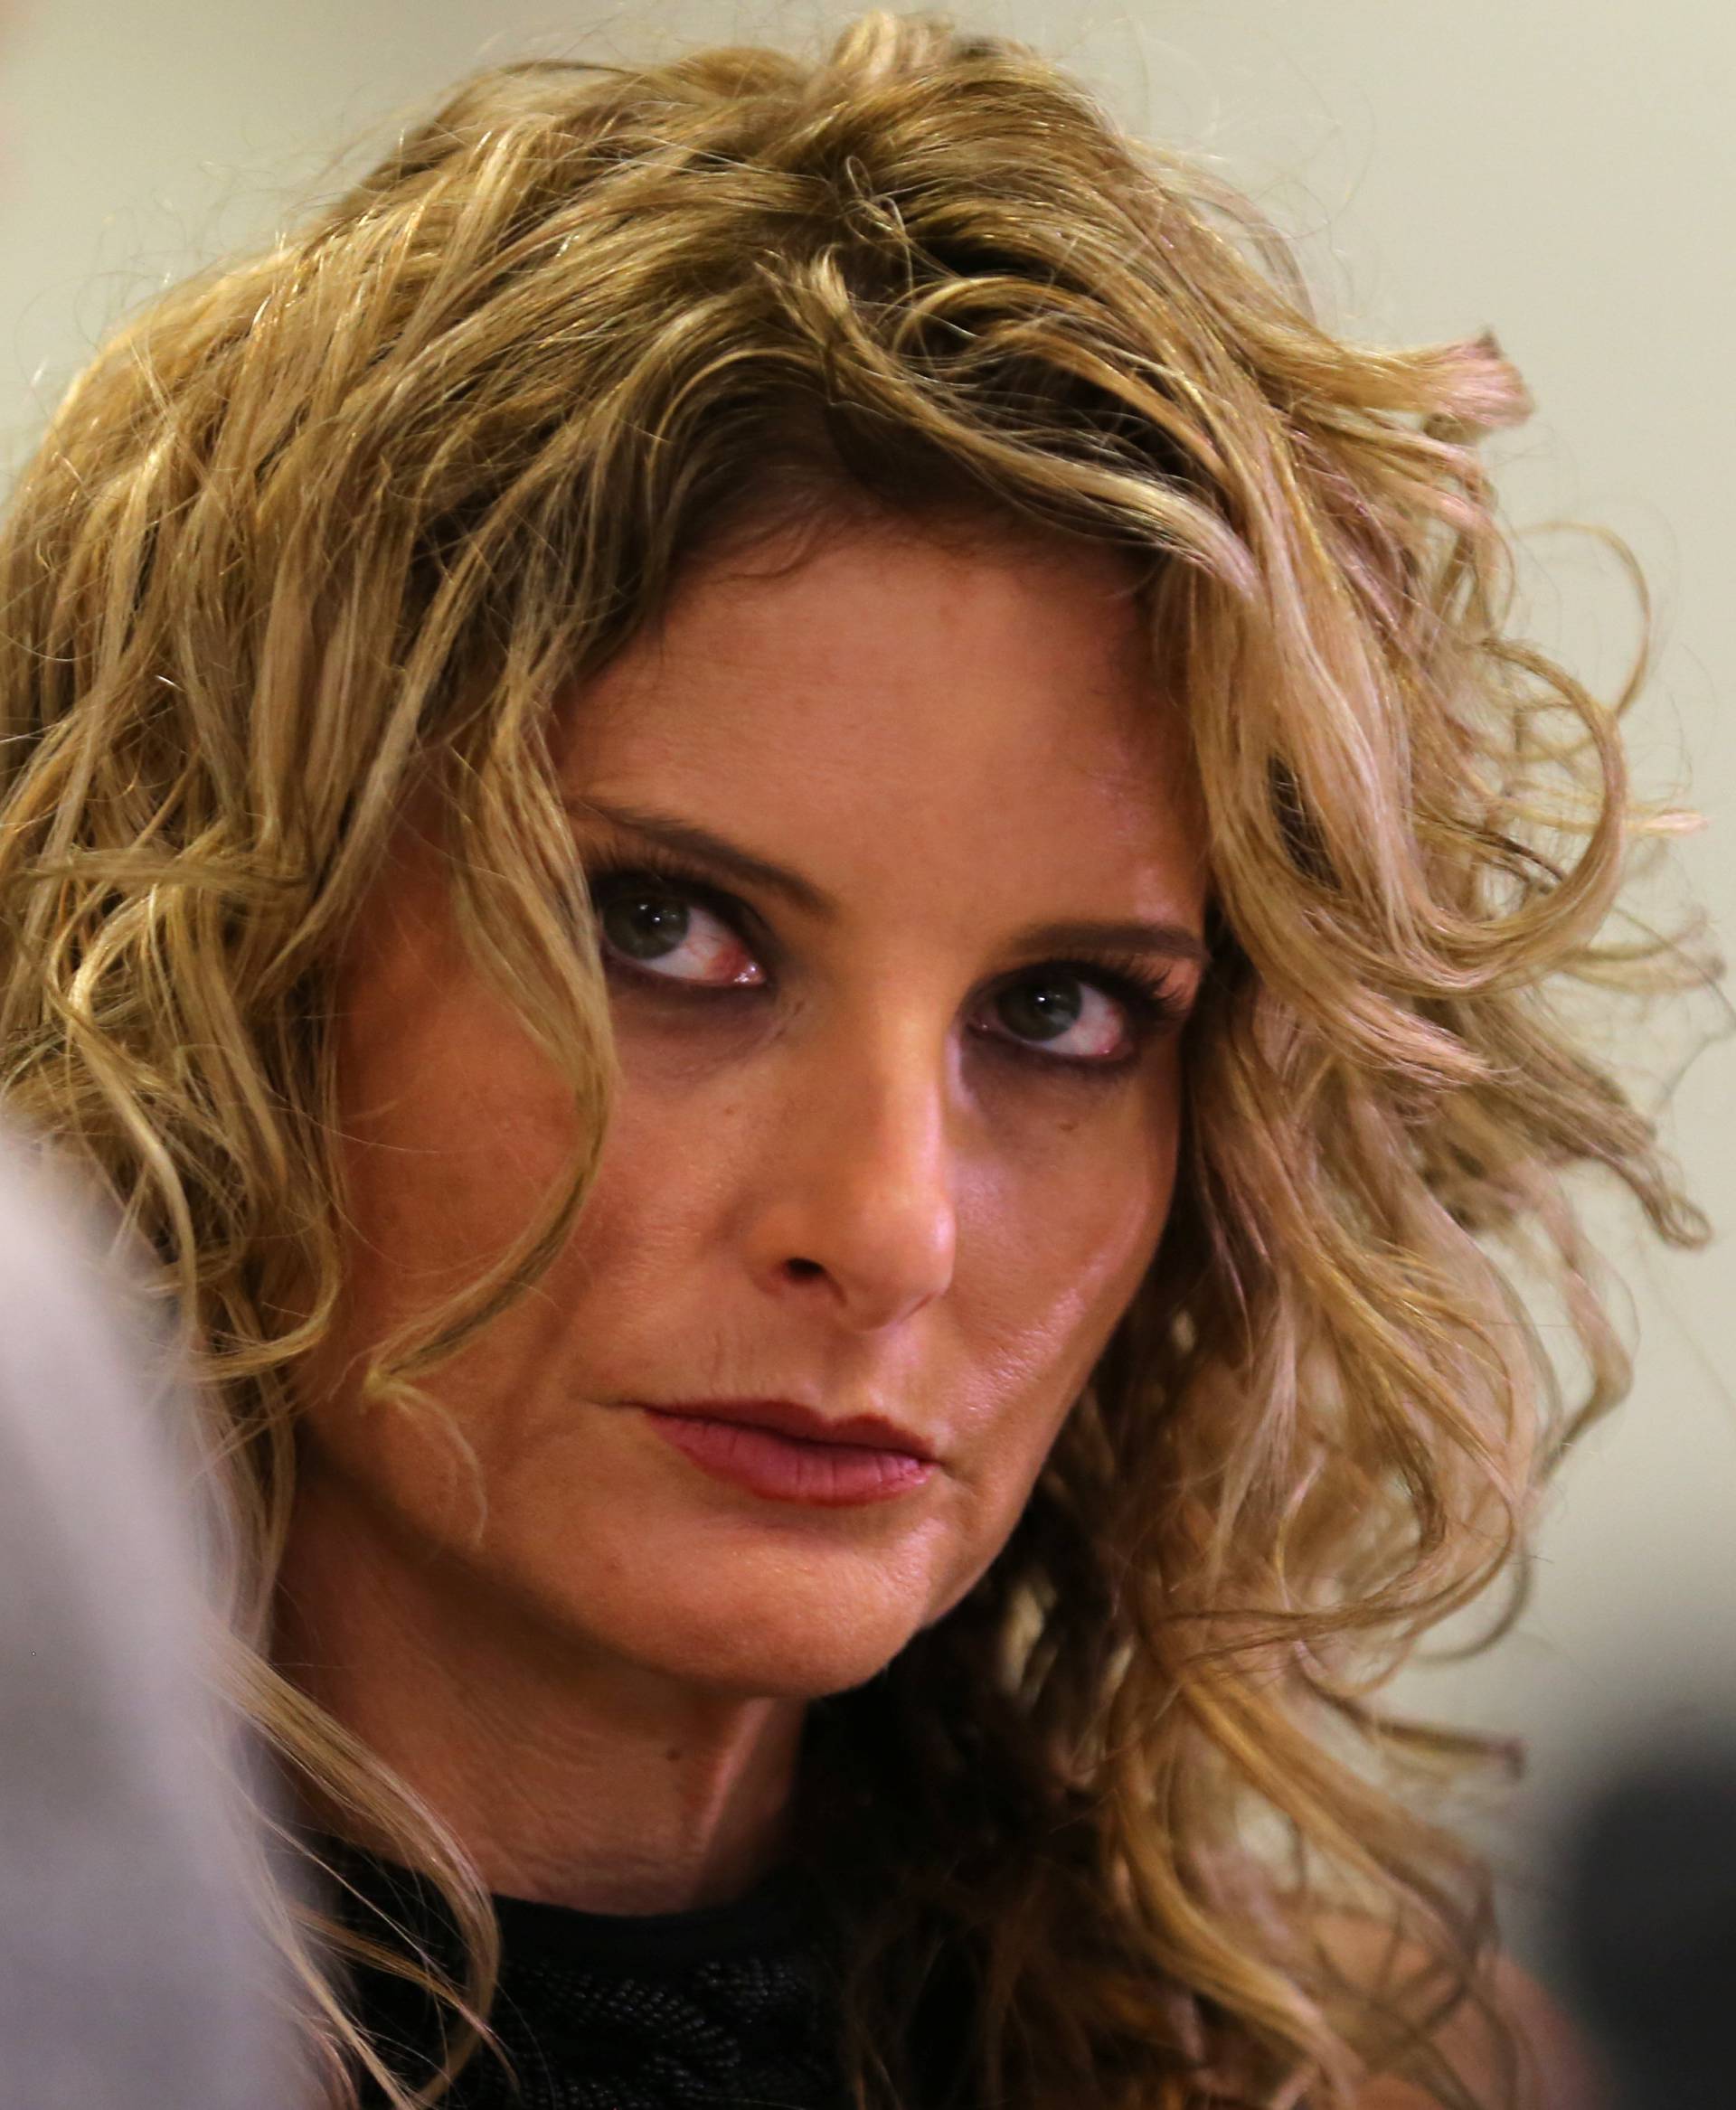 Summer Zervos listens as her attorney Gloria Allred speaks during a news conference announcing the filing of a lawsuit against President-elect Donald Trump in Los Angeles